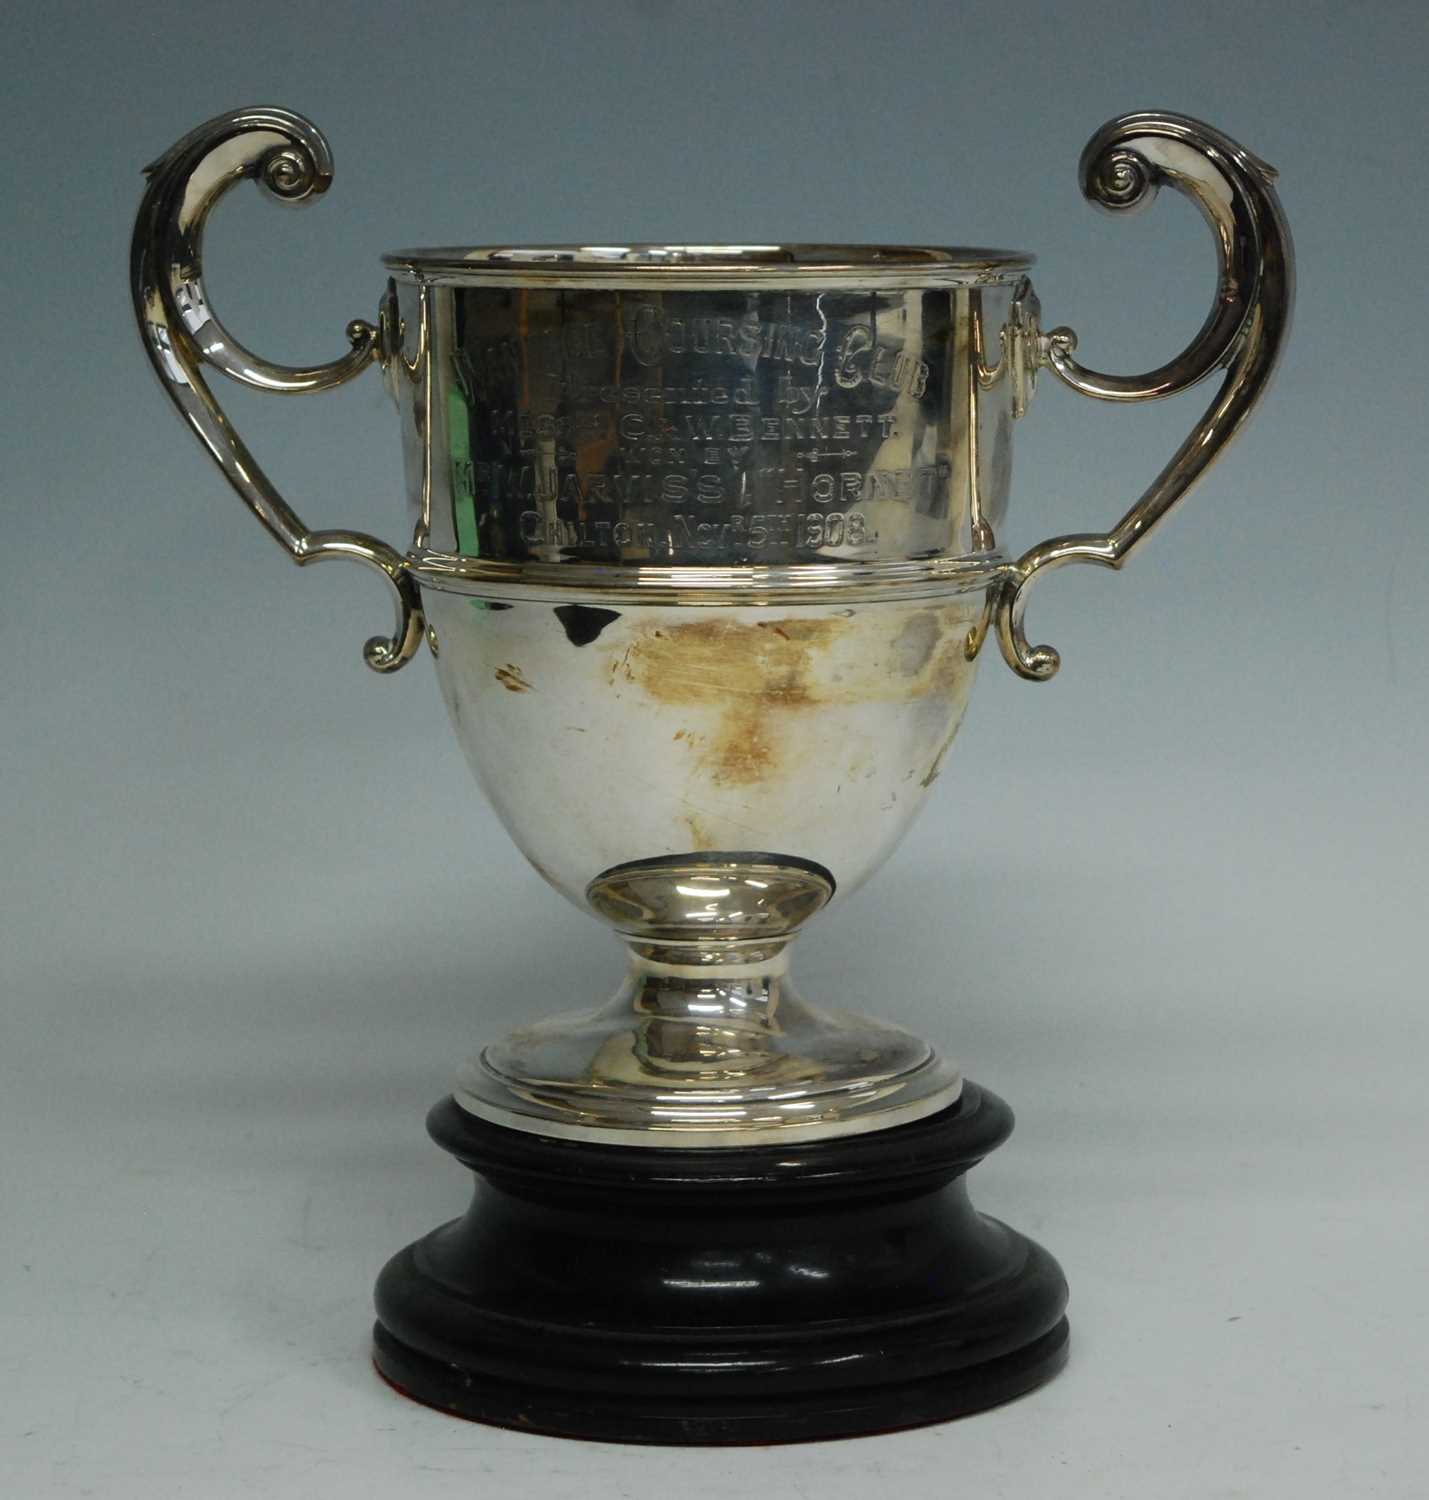 An Edwardian silver trophy cup, the body with a central band and twin c-scroll handles, engraved "